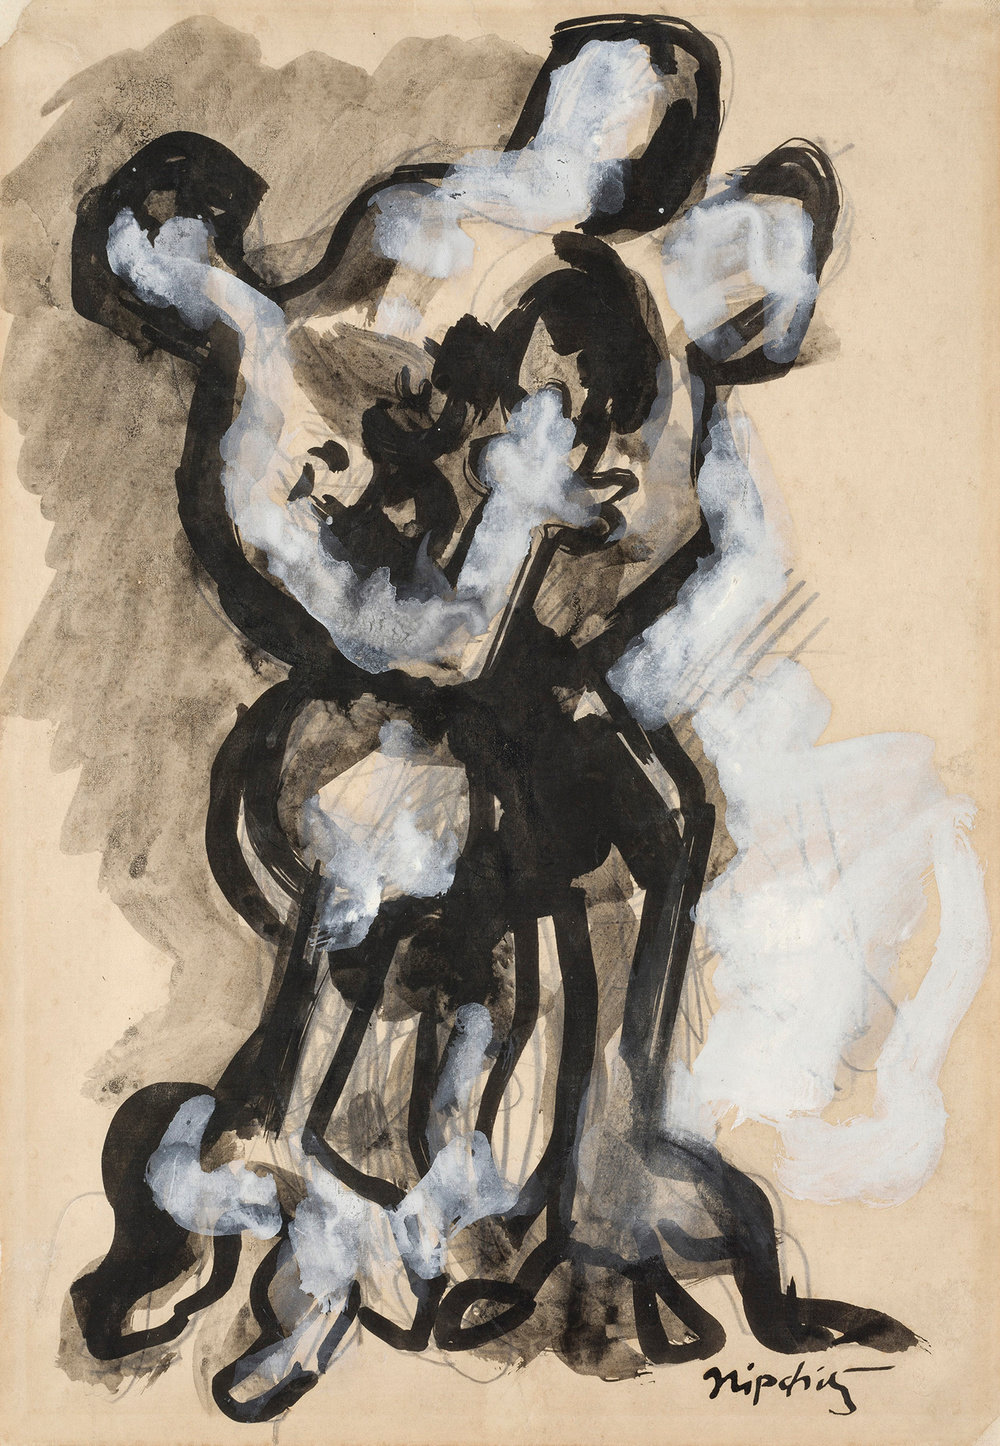 Lipchitz, study for benediction, 1941, pastel and gouache paper, 11 3 4 x 8 1 8 in, nos 57 116